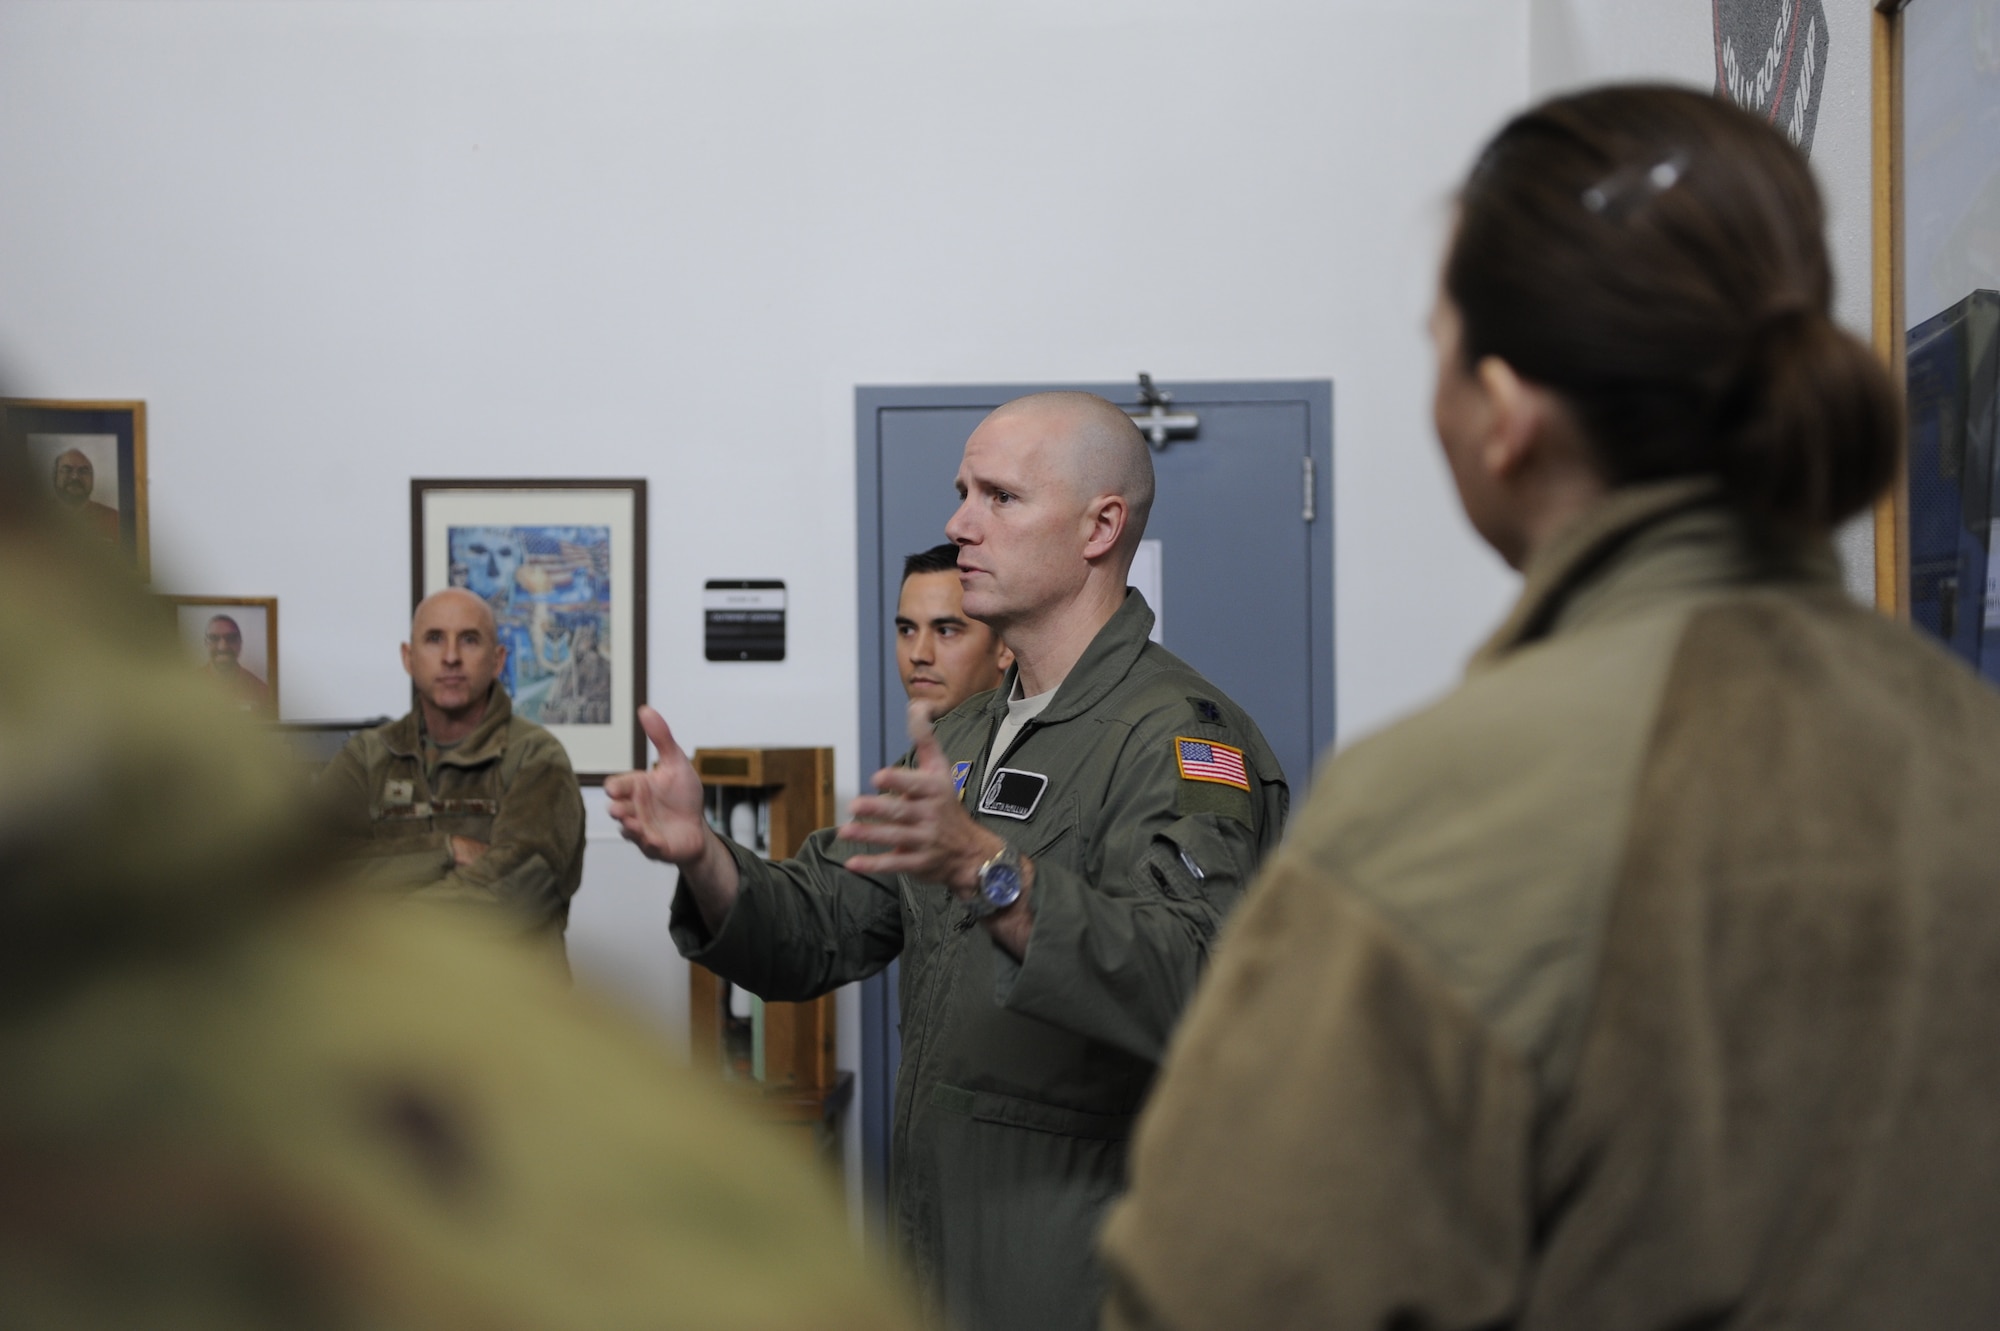 U.S. Air Force Lt Col. Justin McMillan, 90th Operations Group Deputy Commander, briefs a group during the Secretary of the Air Force visit to F.E. Warren Air Force Base, Wyoming, Oct. 27, 2019. This visit marks Secretary Barbara Barrett's first official visit since becoming the SECAF.